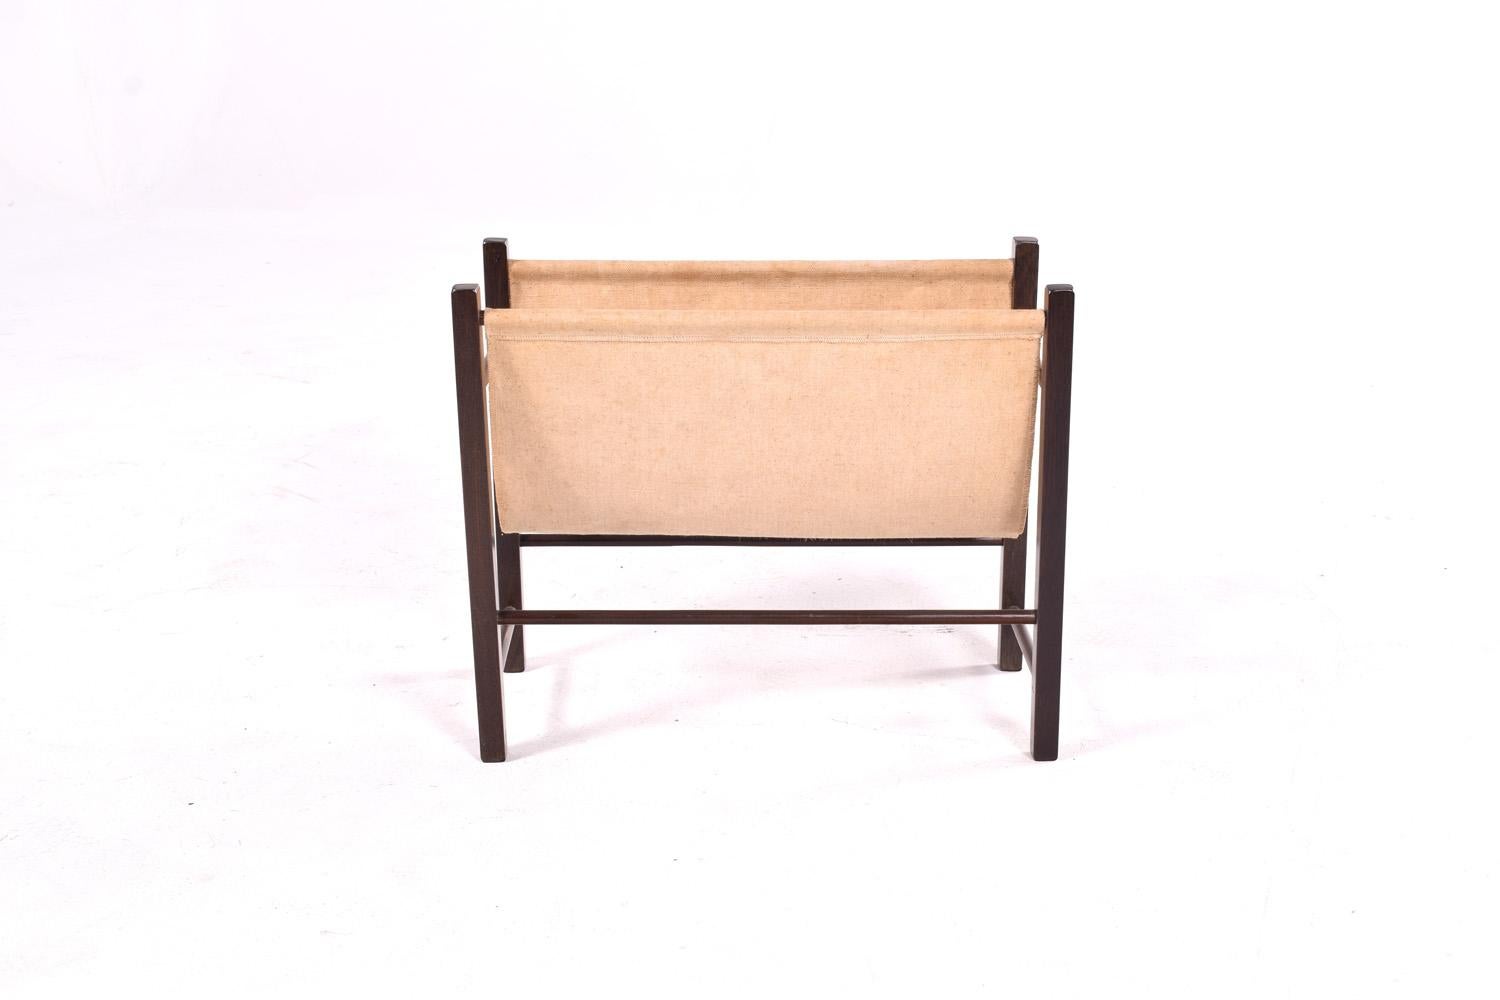 
This is a mid-century modern magazine rack, featuring a minimalist design that complements its functional purpose. The frame is made of teak, a high-quality hardwood known for its durability and beautiful grain, giving the piece a timeless appeal.